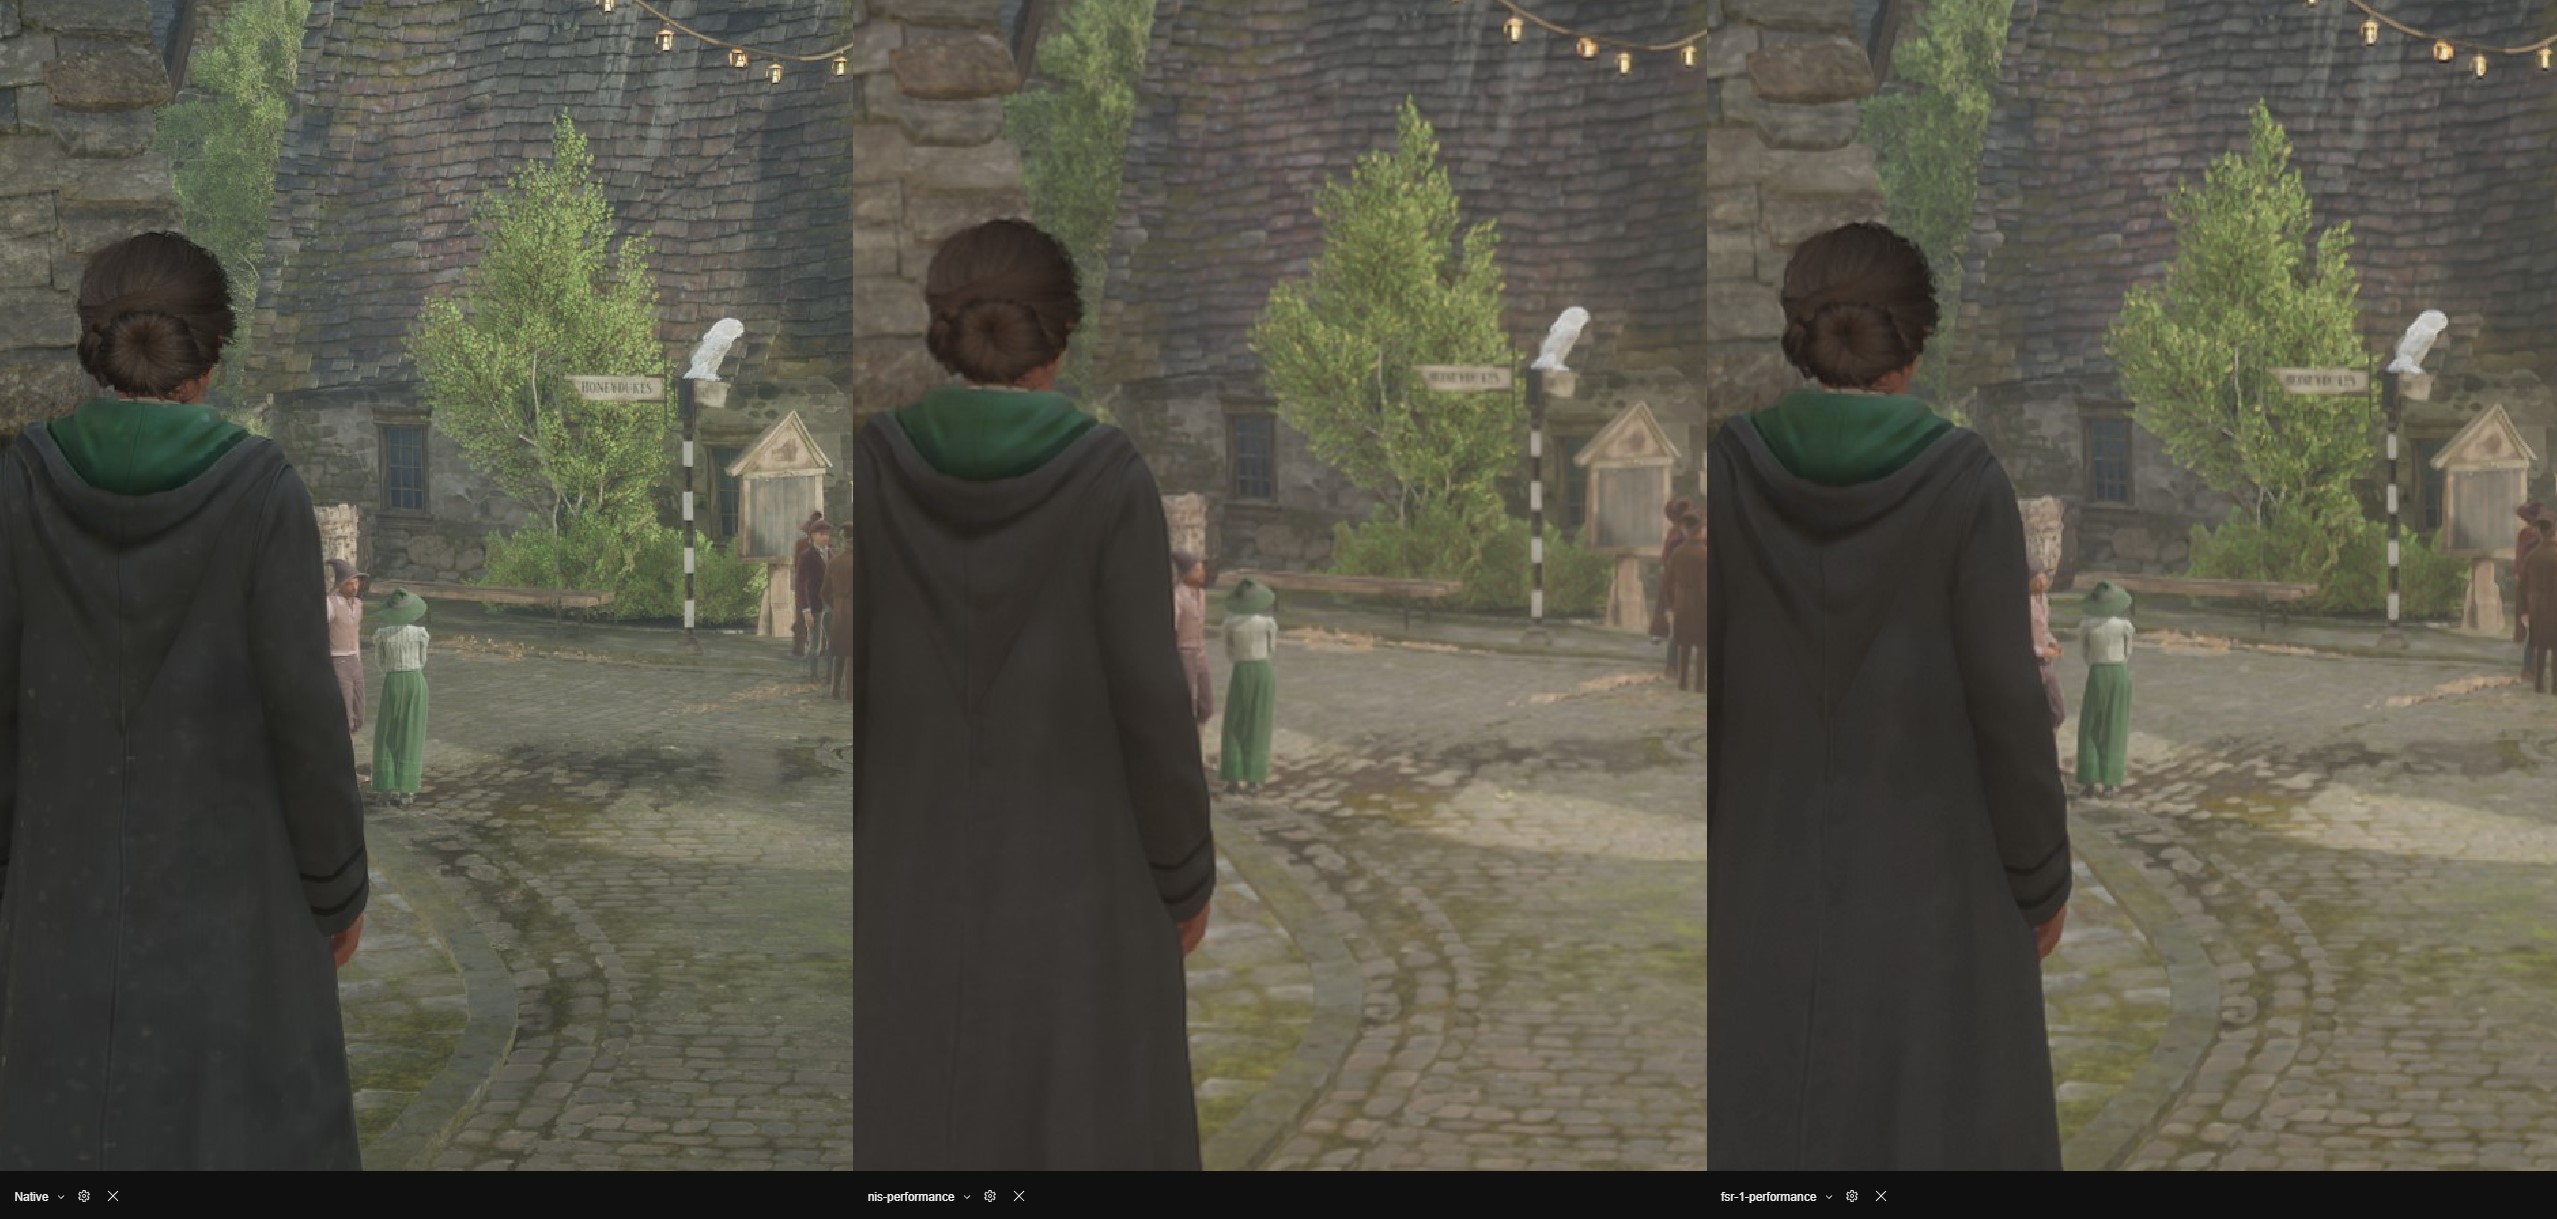 Hogwarts Legacy PC: best settings, ray tracing, and more